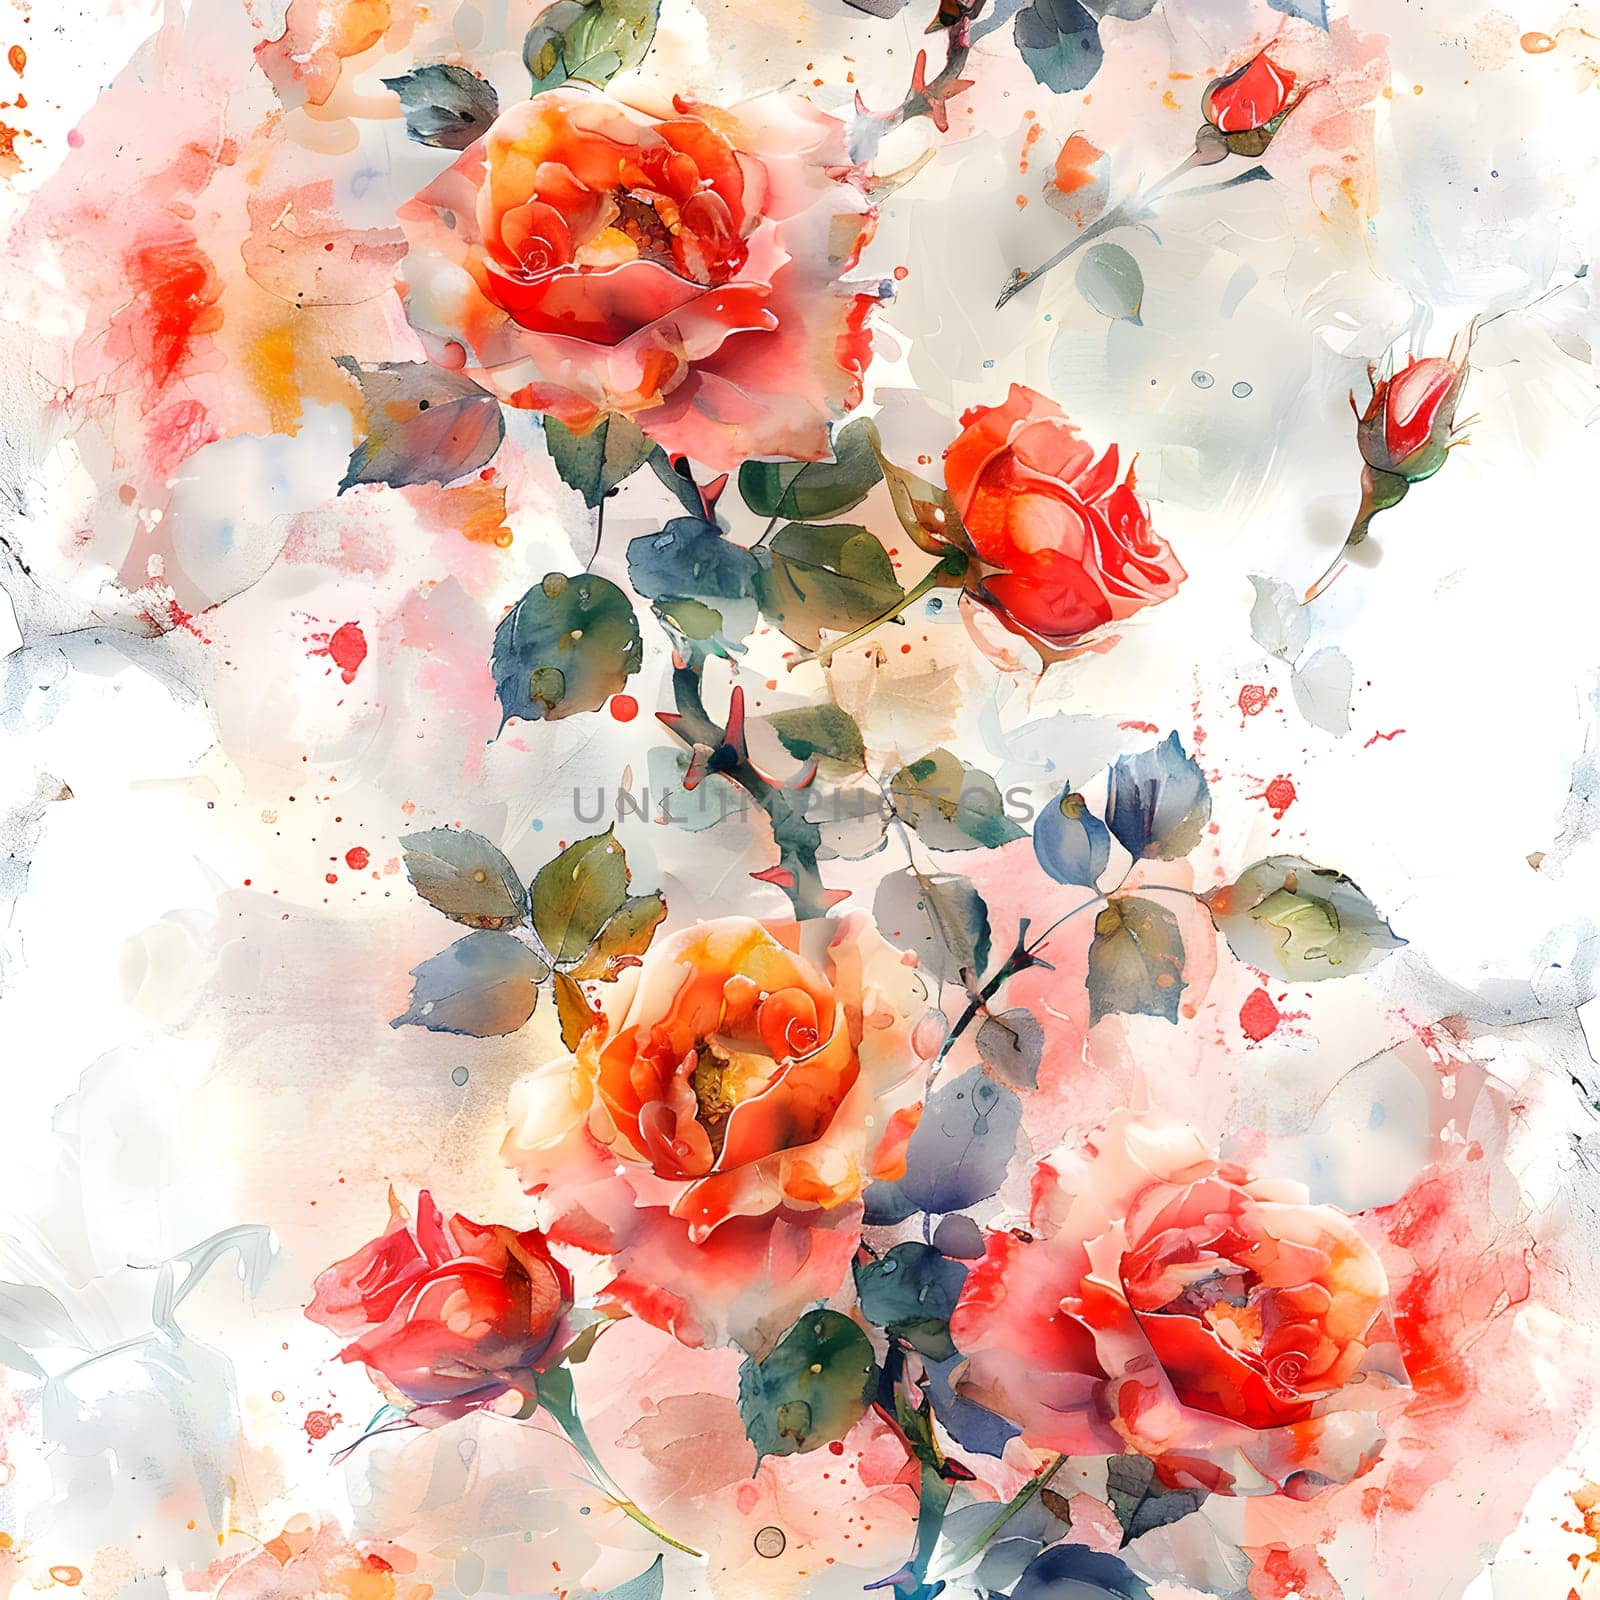 A beautiful watercolor painting featuring vibrant red roses against a crisp white background. This art piece captures the essence of hybrid tea roses and garden roses with delicate petals